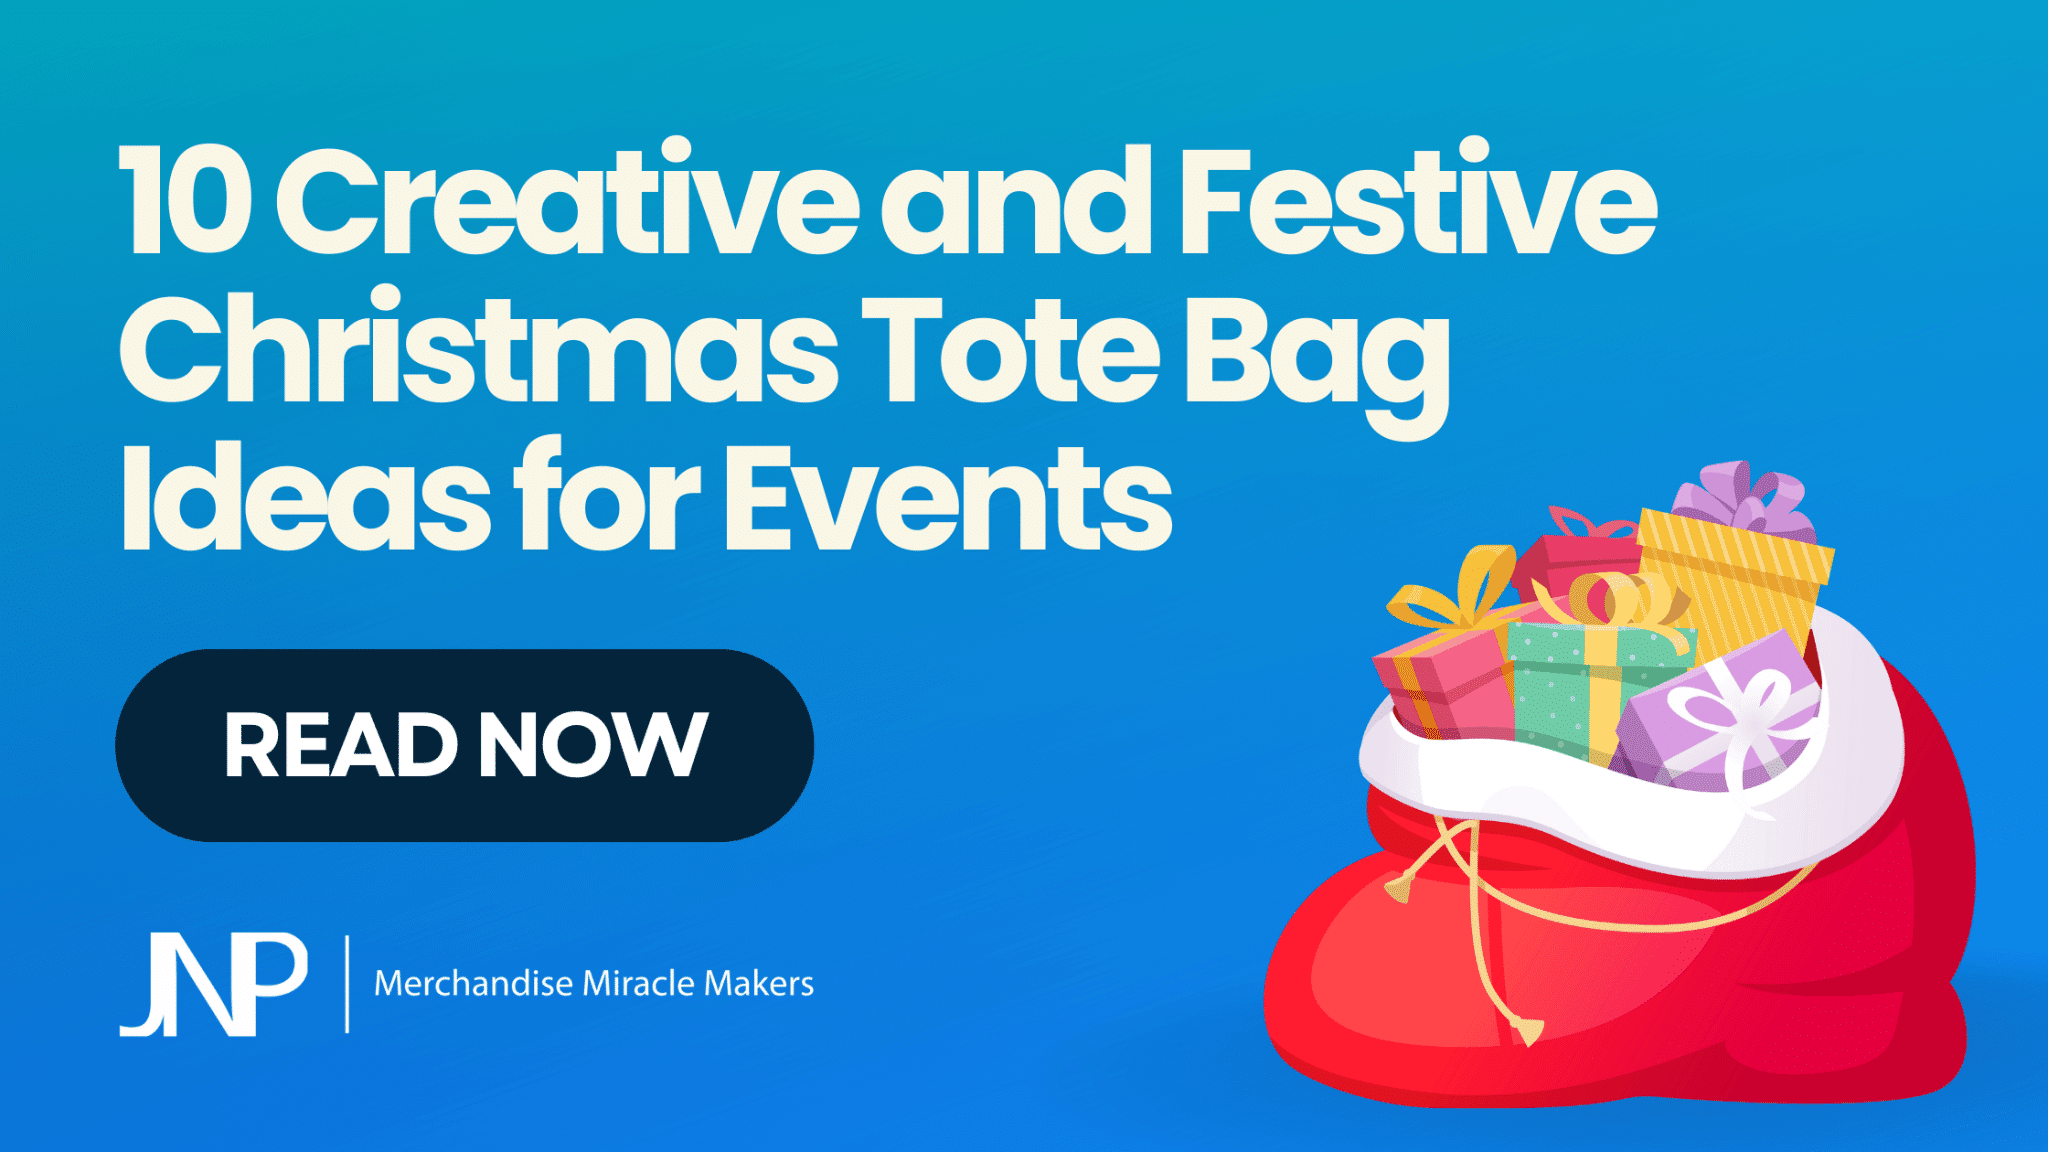 10 Creative and Festive Christmas Tote Bag Ideas for Events